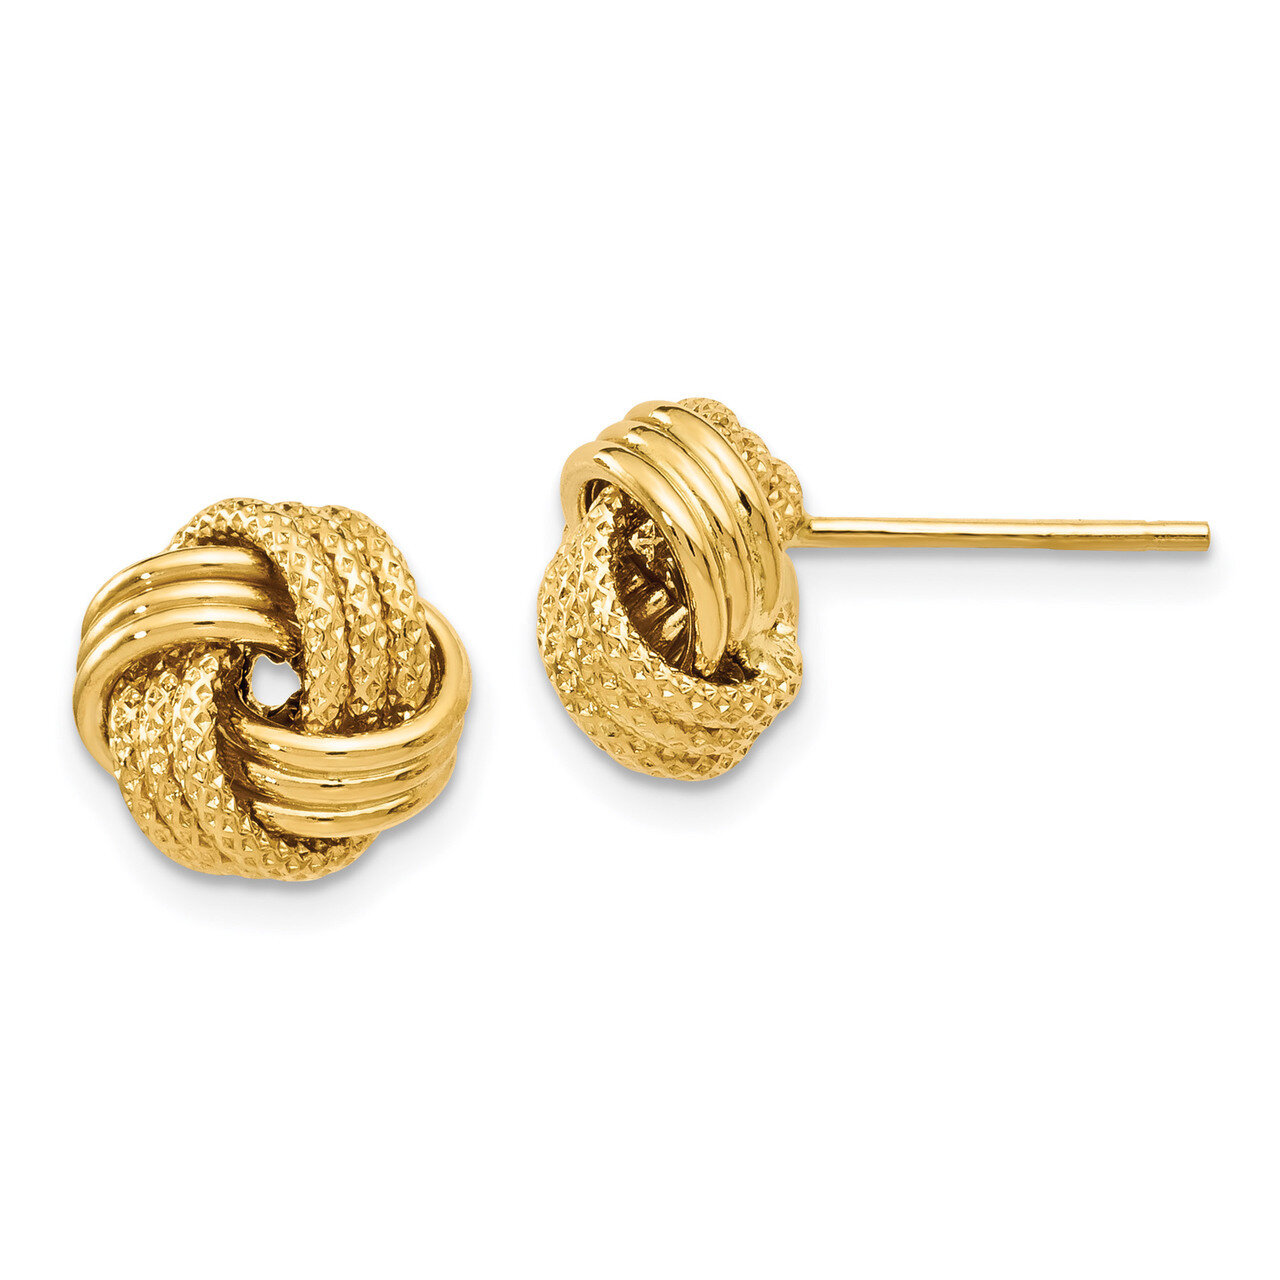 Textured Love Knot Earrings 14k Gold Polished HB-LE1303